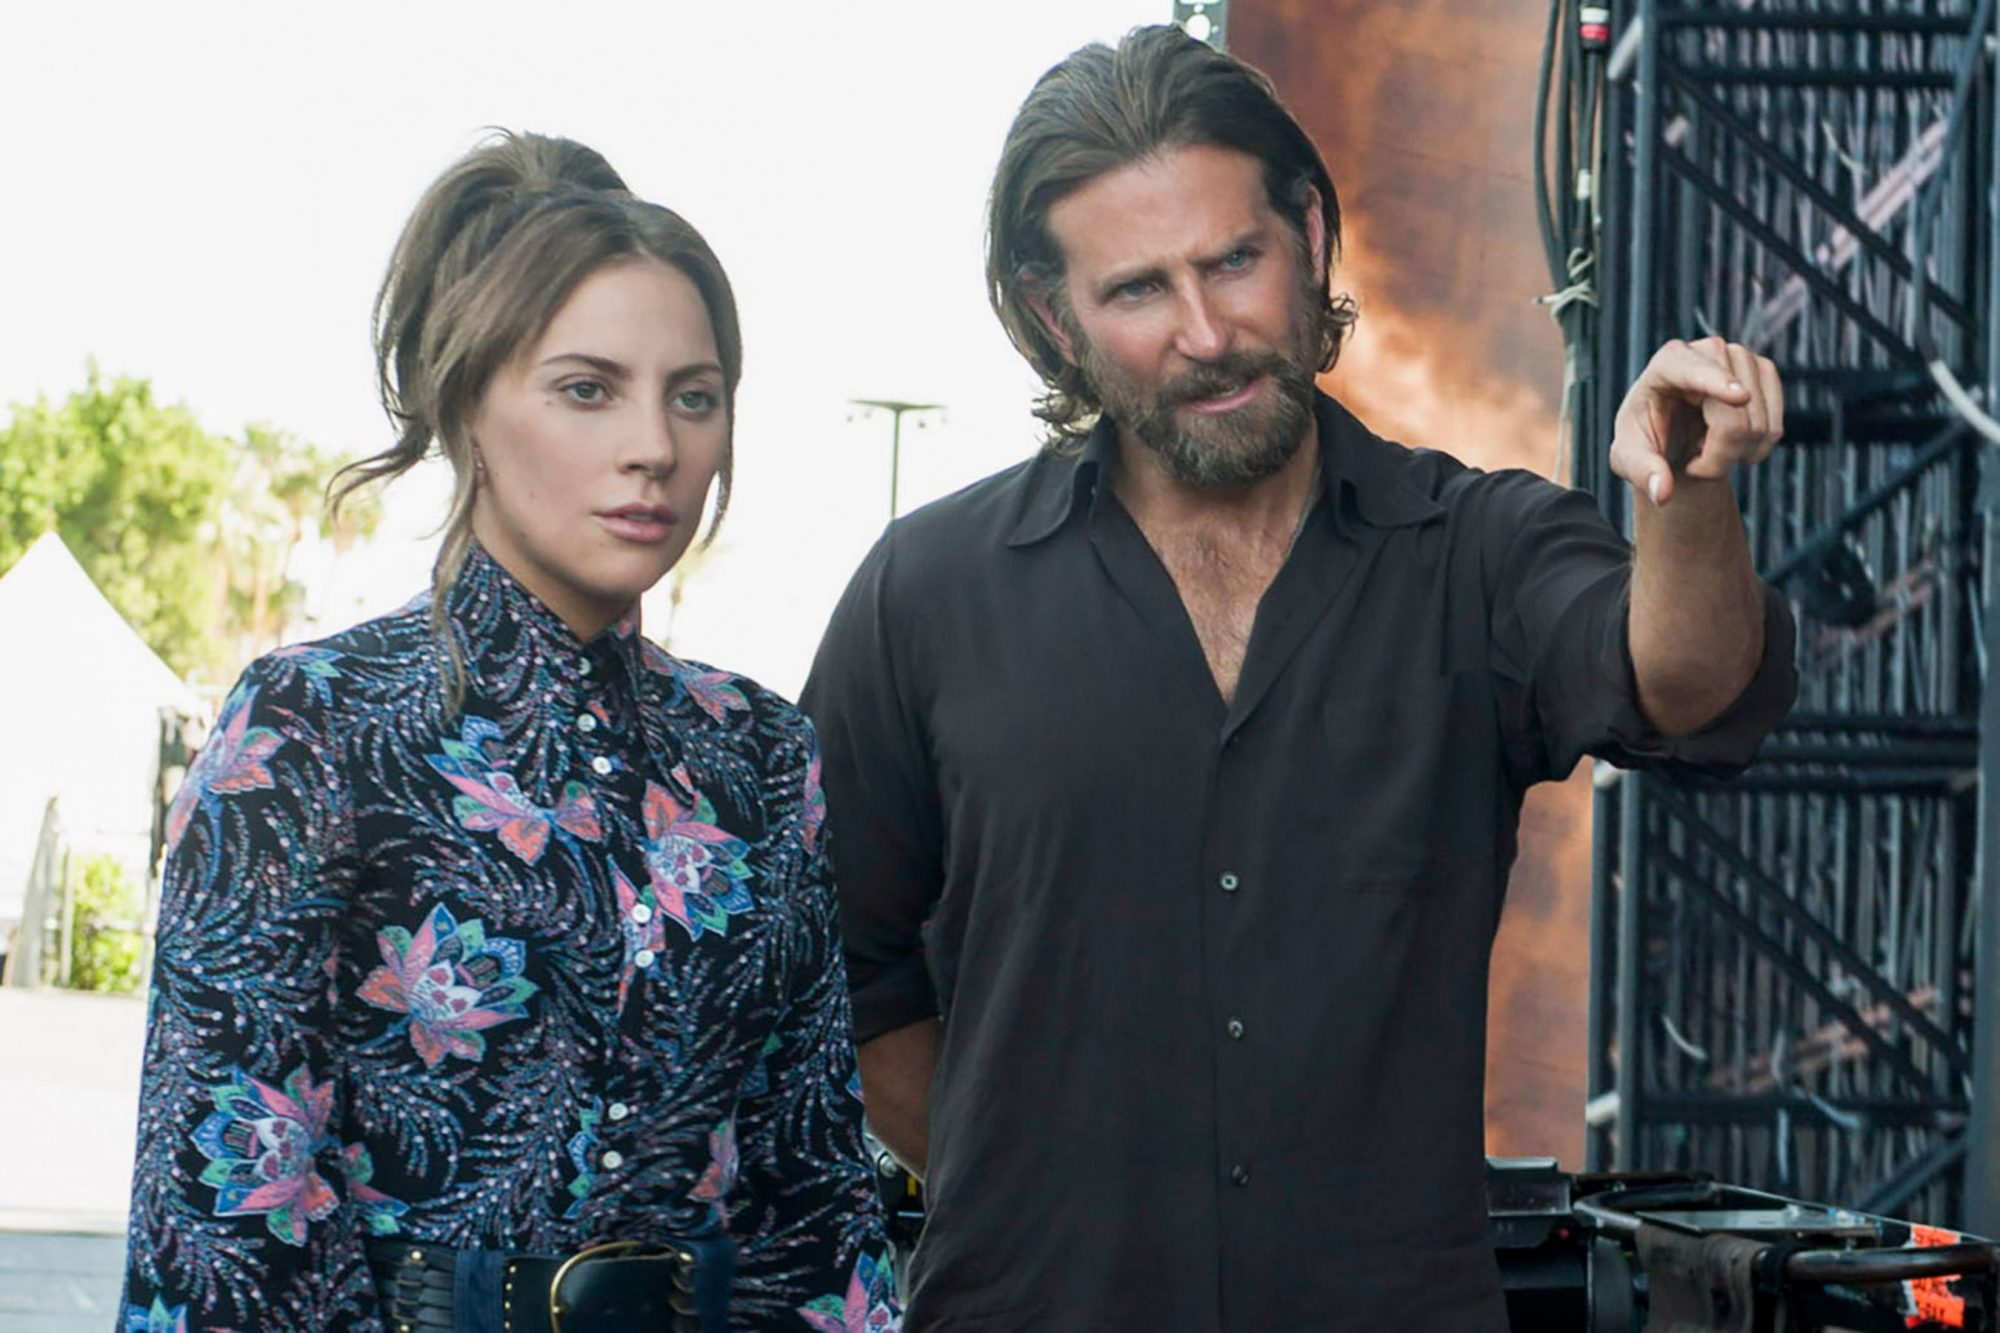 Is 'A Star Is Born' Based On A Real Story? - OtakuKart